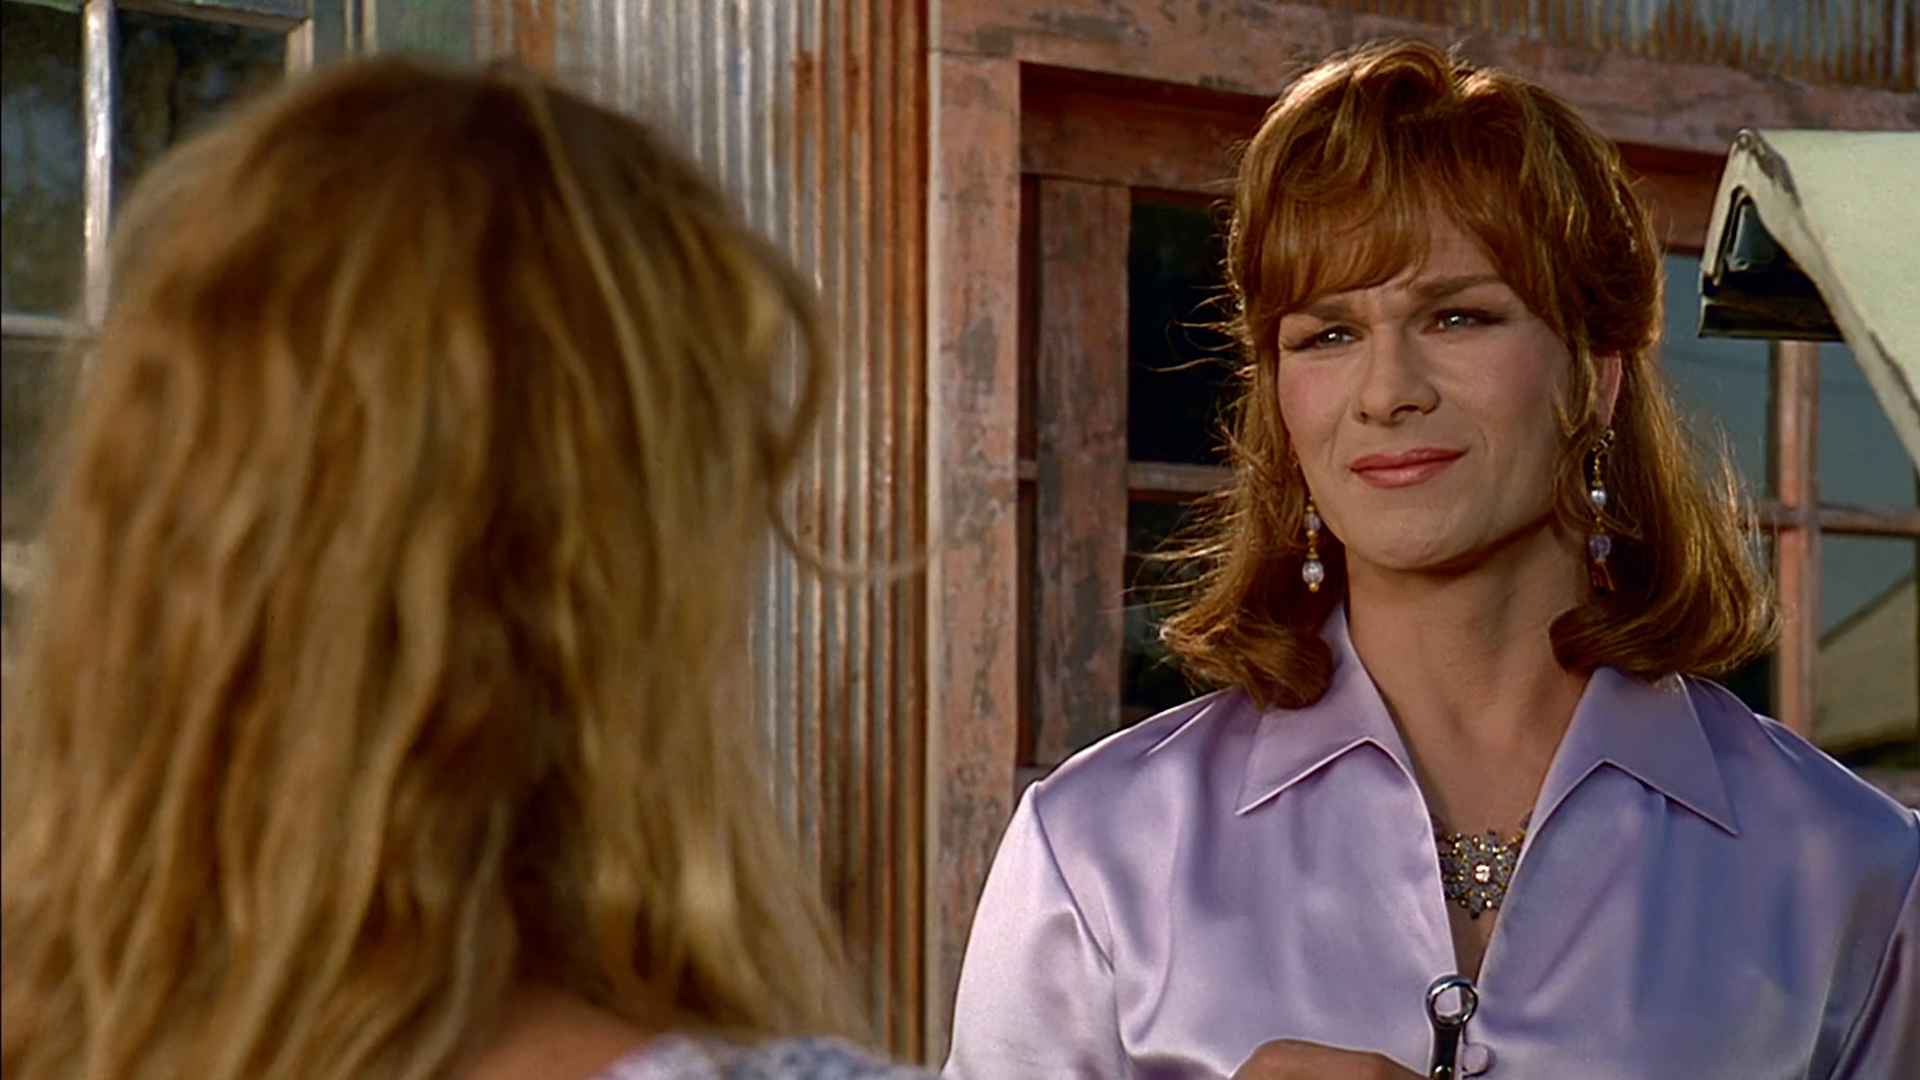 Patrick Swayze dressed as a woman in To Wong Foo